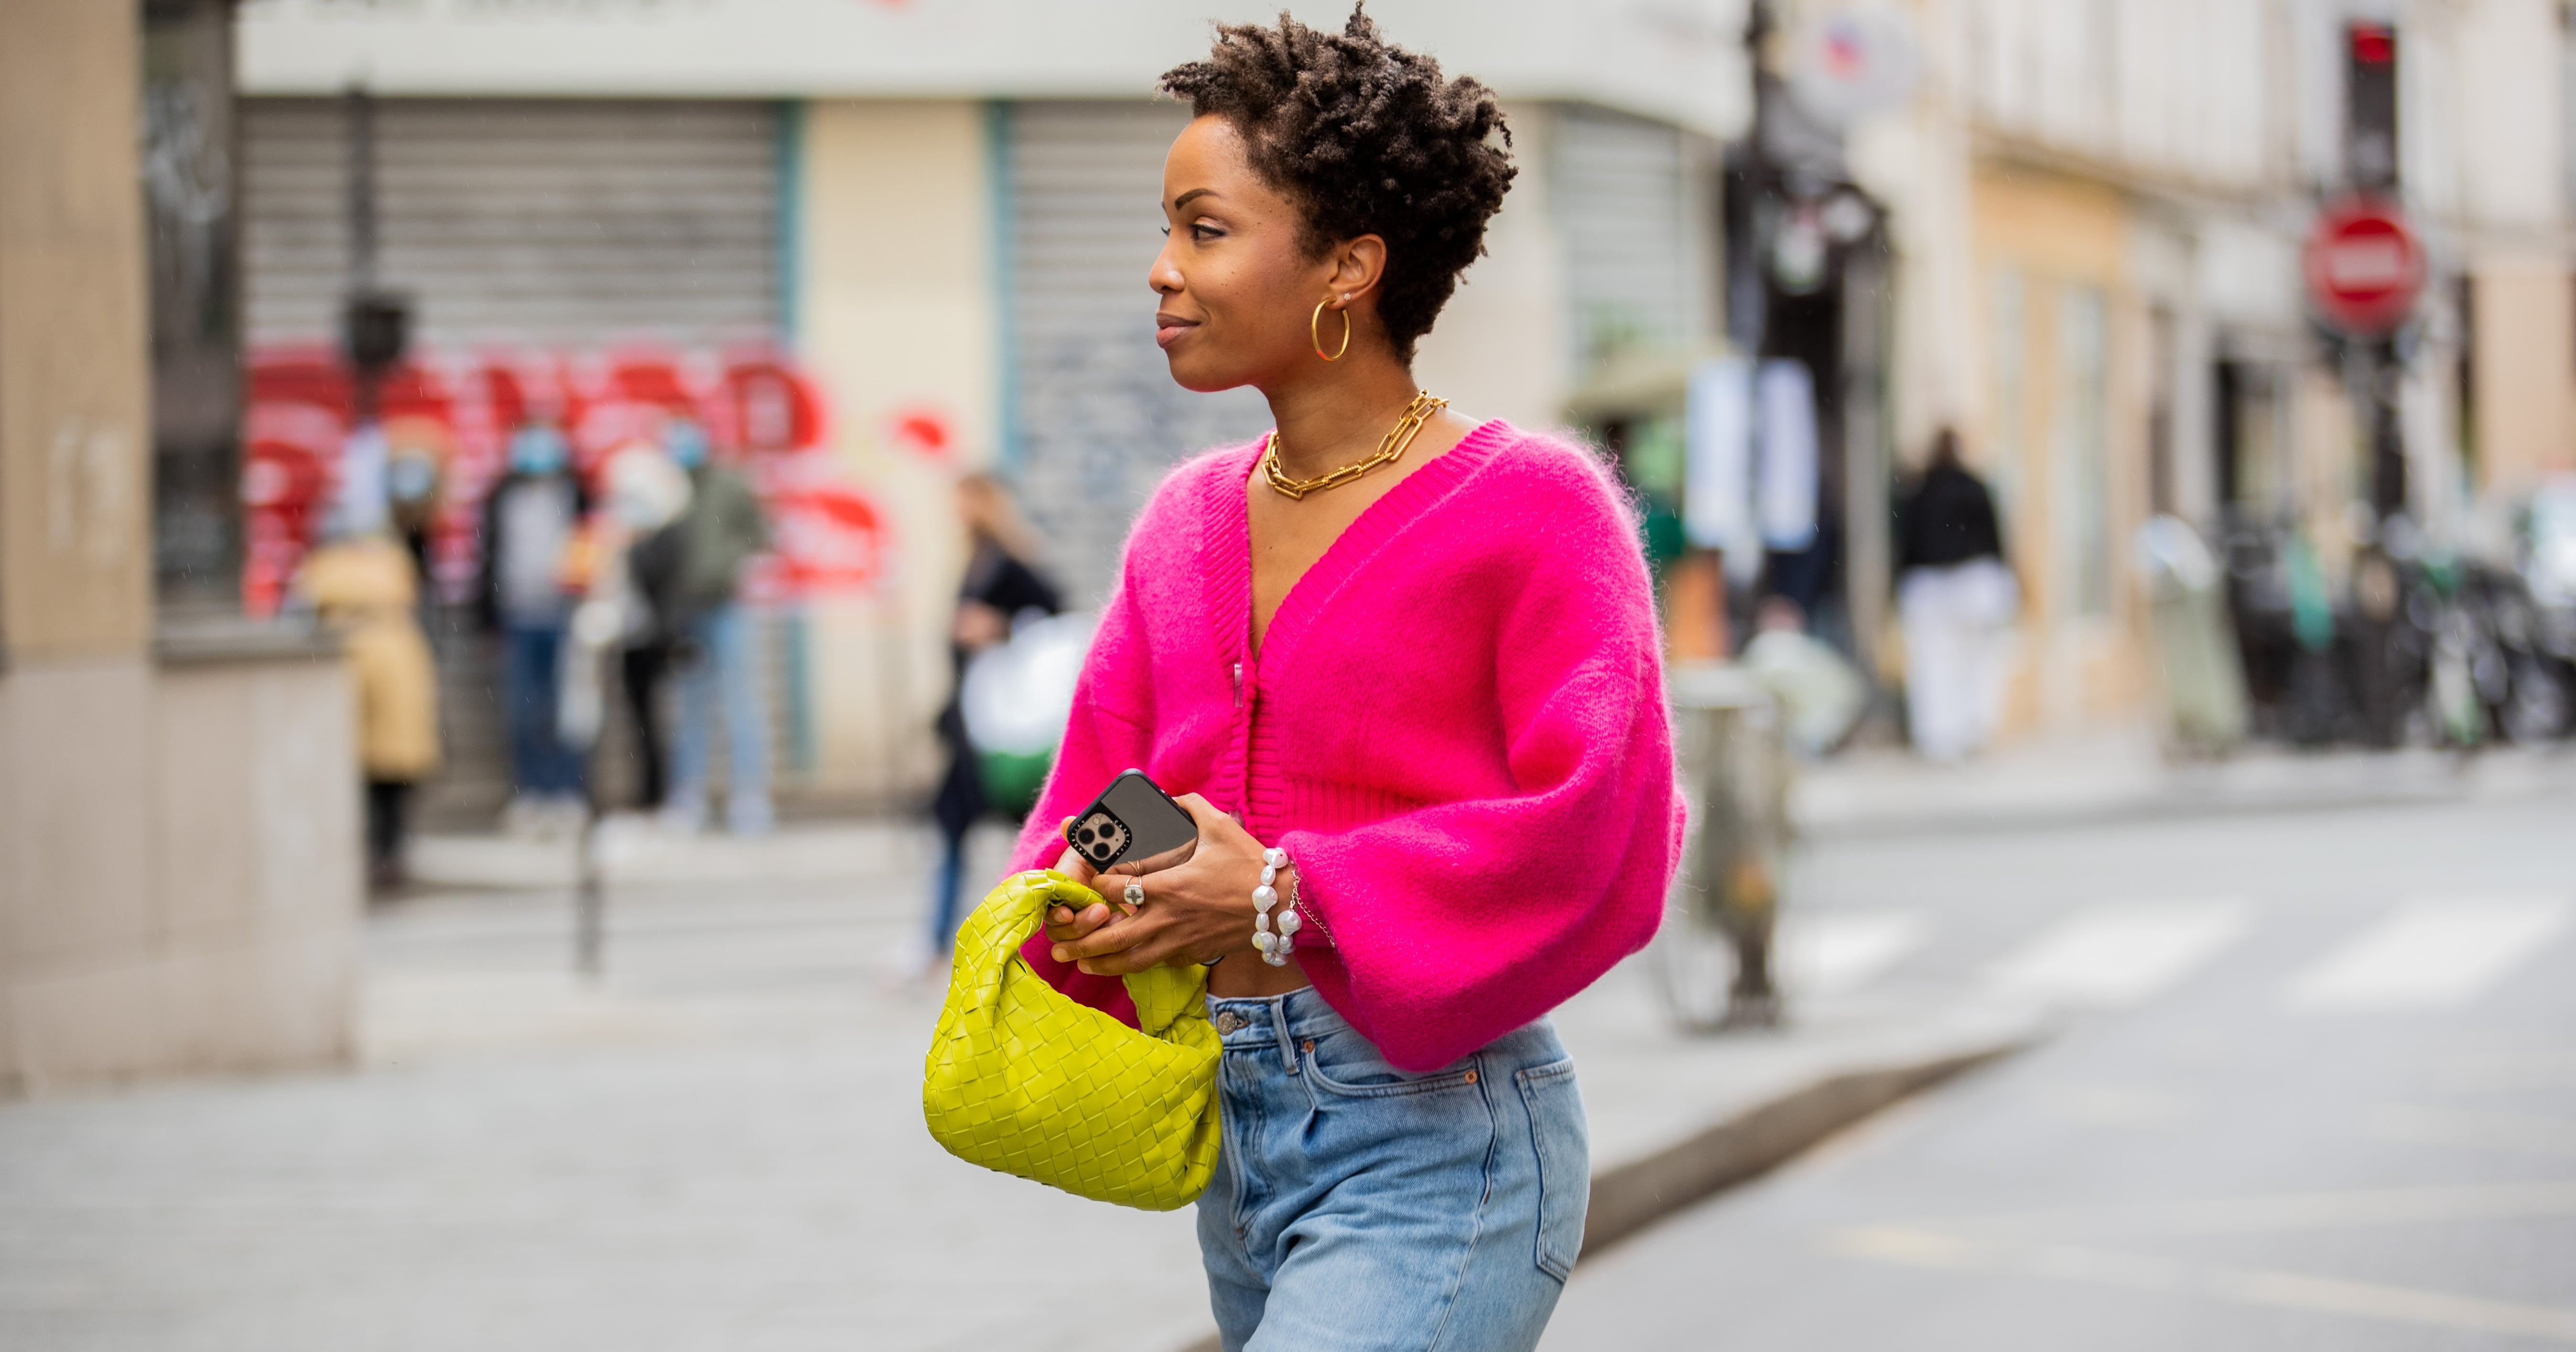 The 21 Best Knitwear Brands for Cardigans, Sweaterdresses, Cashmere Sets,  and Beyond